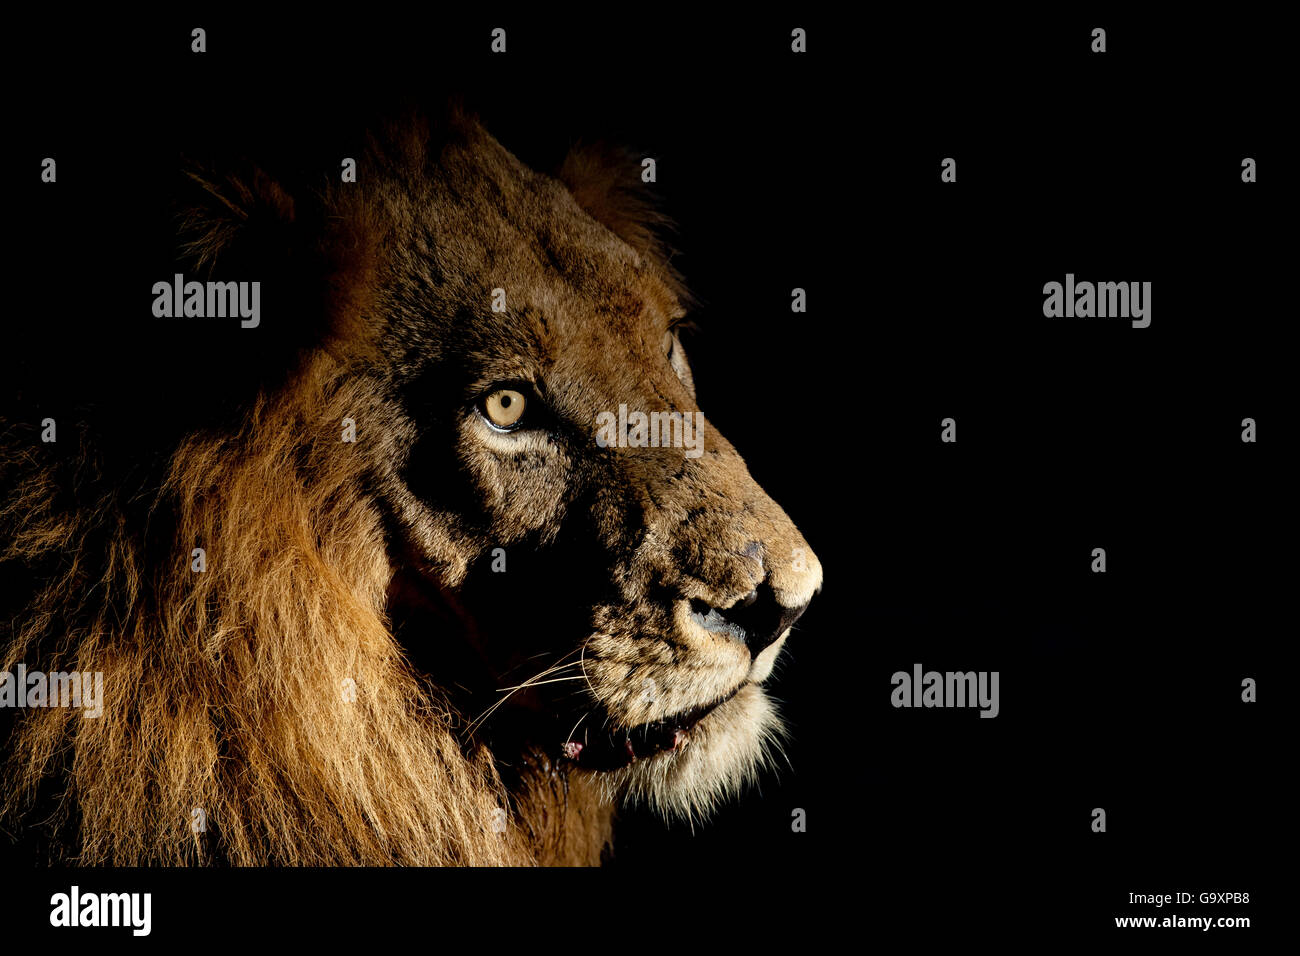 Lion (Panthera leo) male with scars photographed with side-lit spot light at night. Greater Kruger National Park, South Africa, Stock Photo